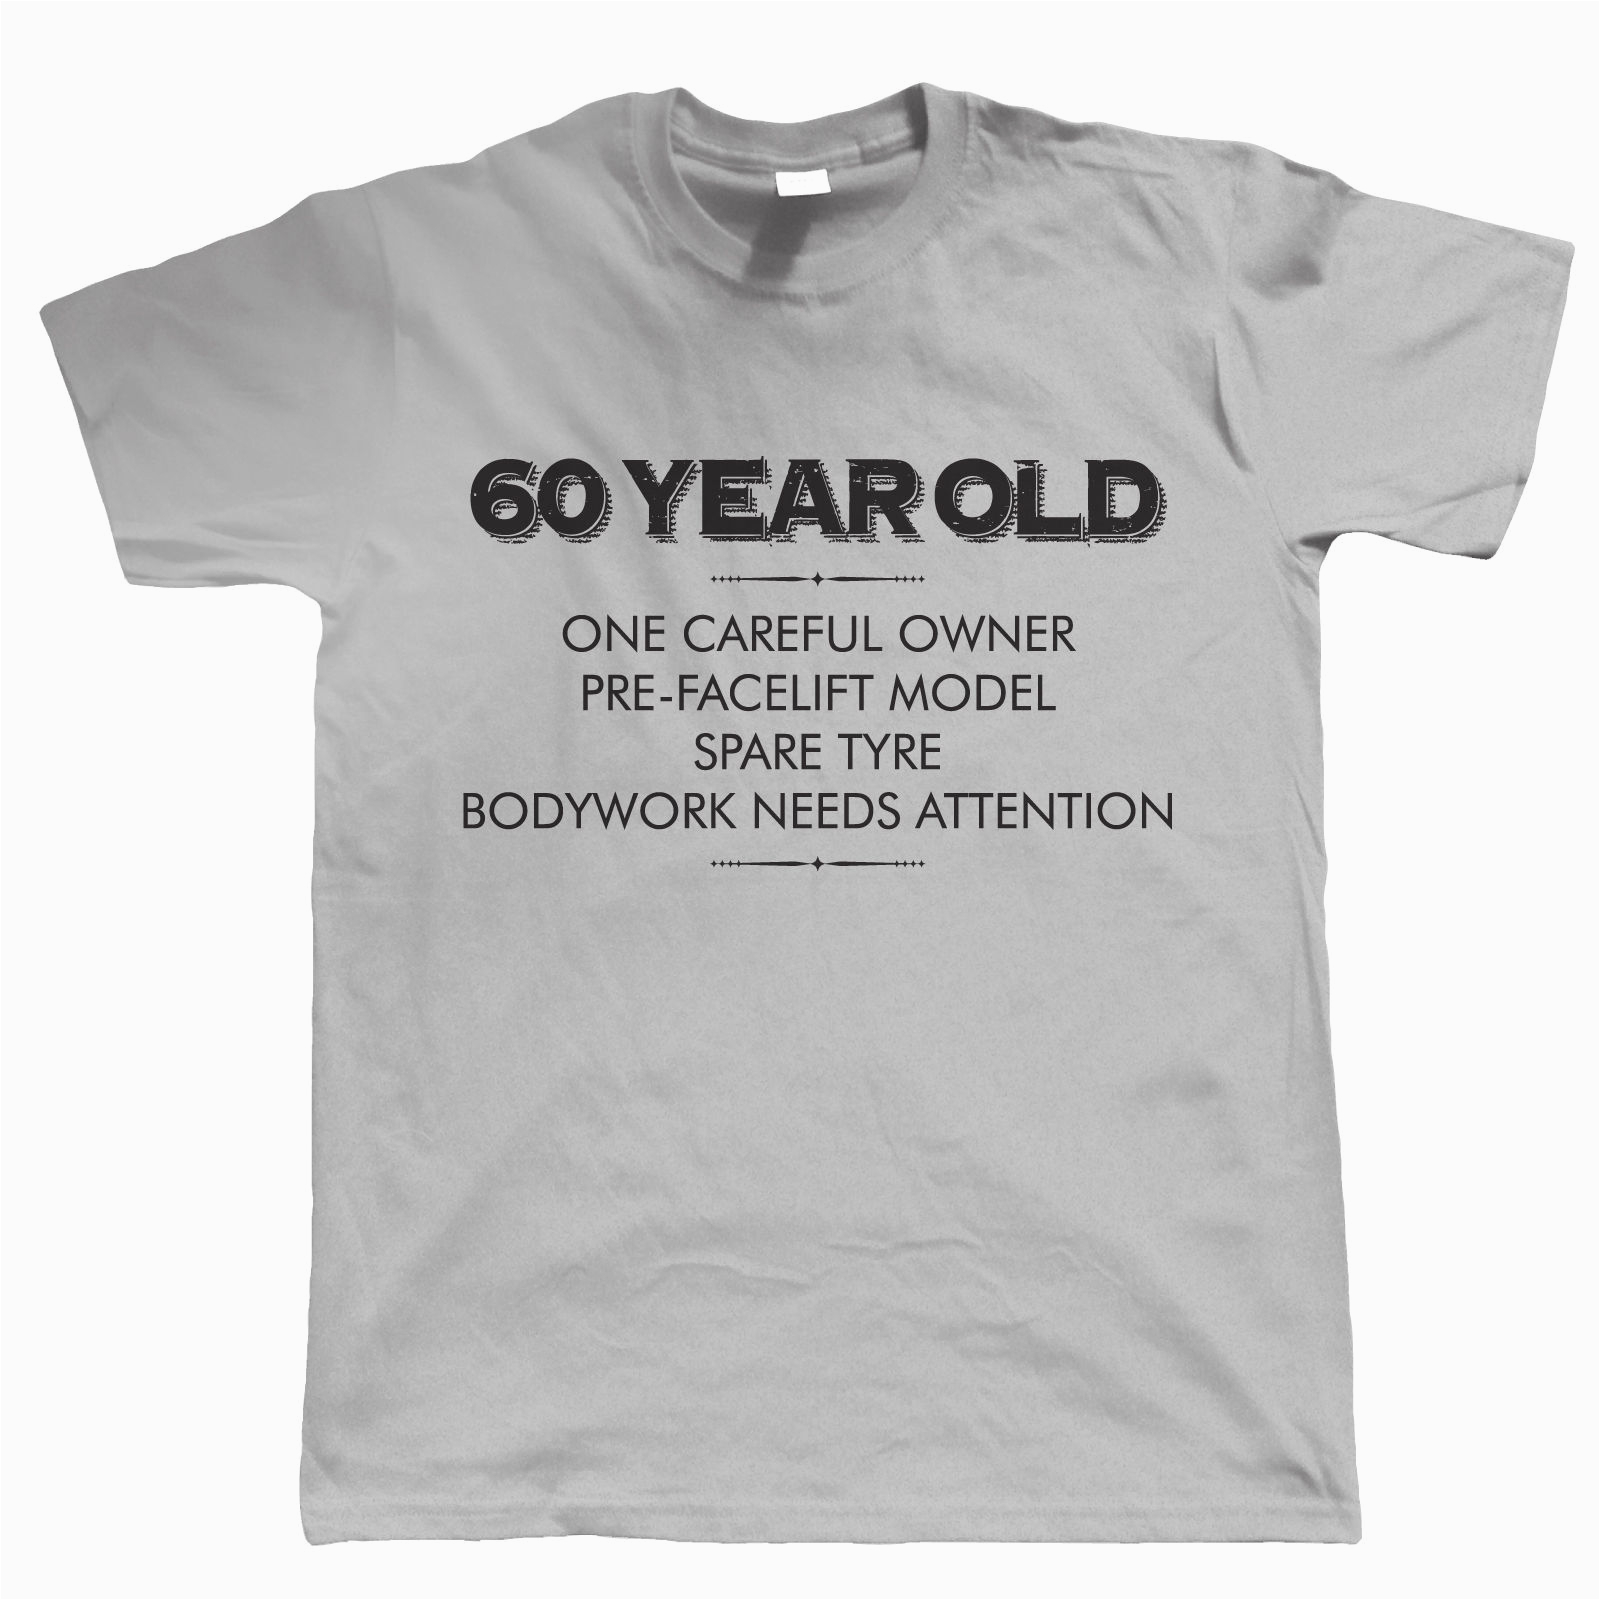 Birthday Gifts for Him 60 Years Old 60 Year Old One Careful Owner Funny T Shirt Birthday